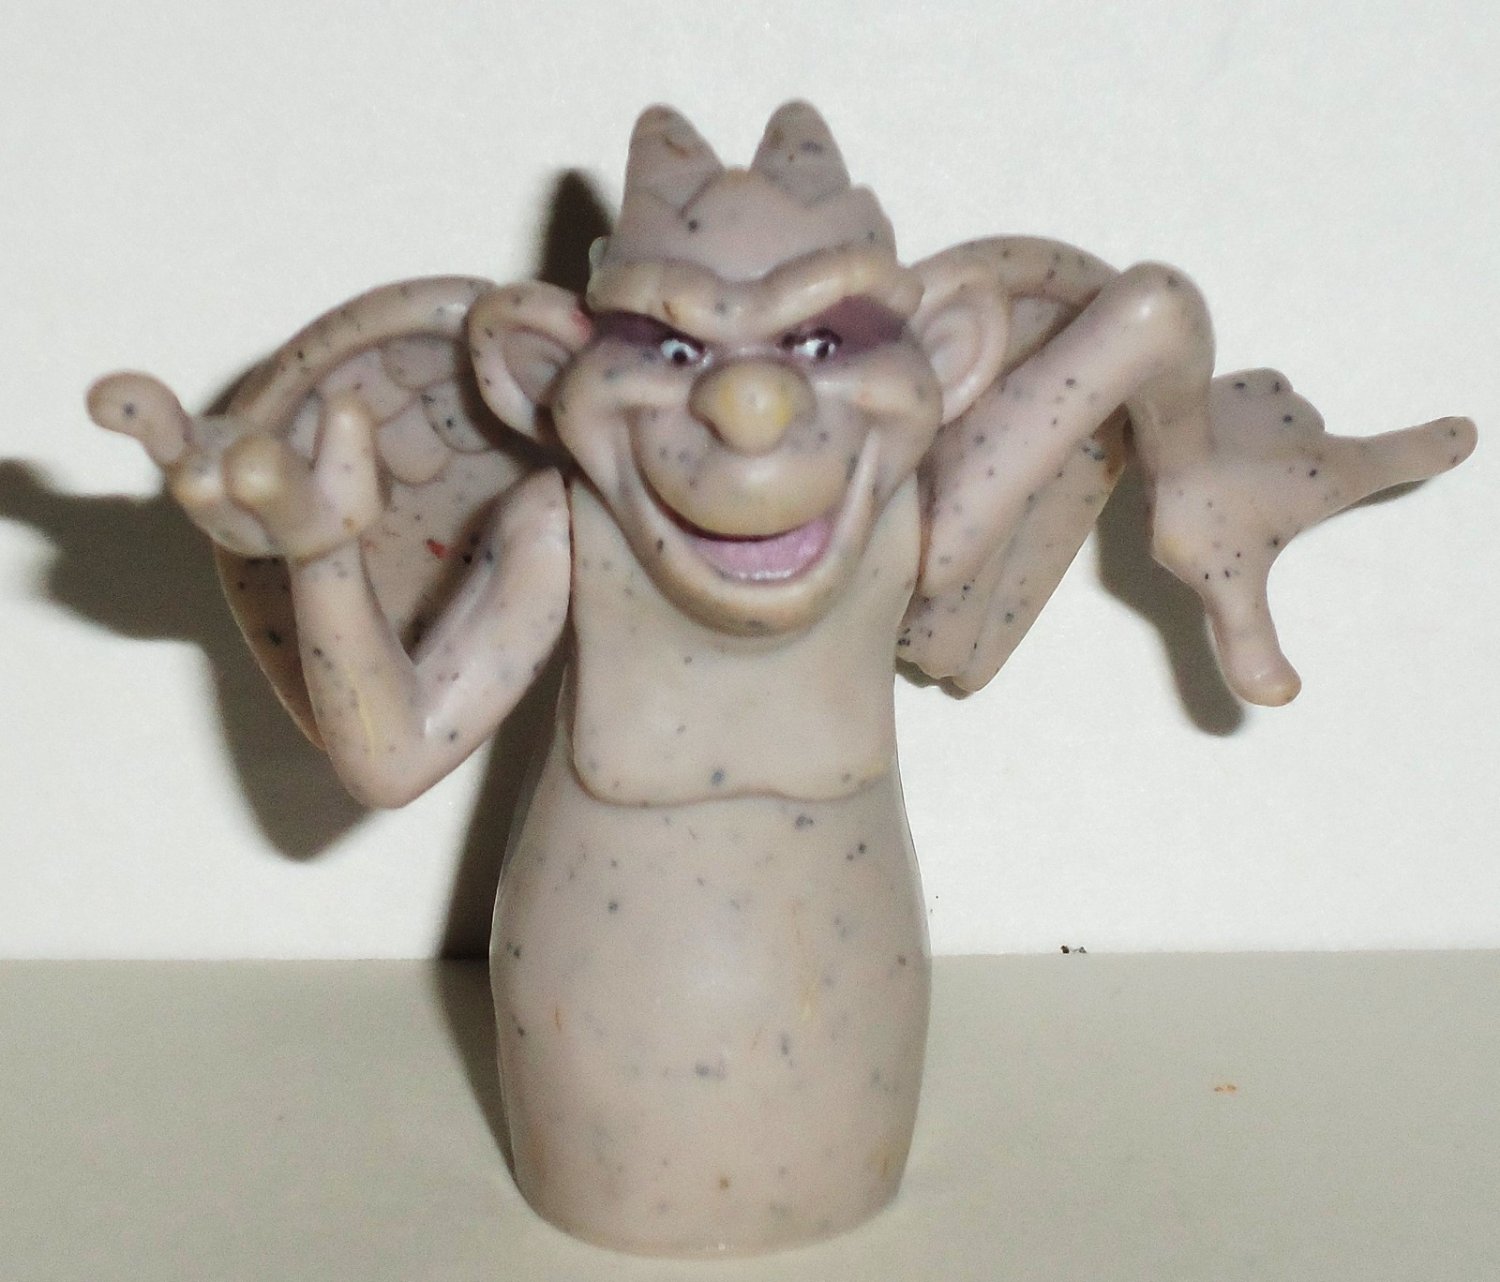 download gargoyles from the hunchback of notre dame